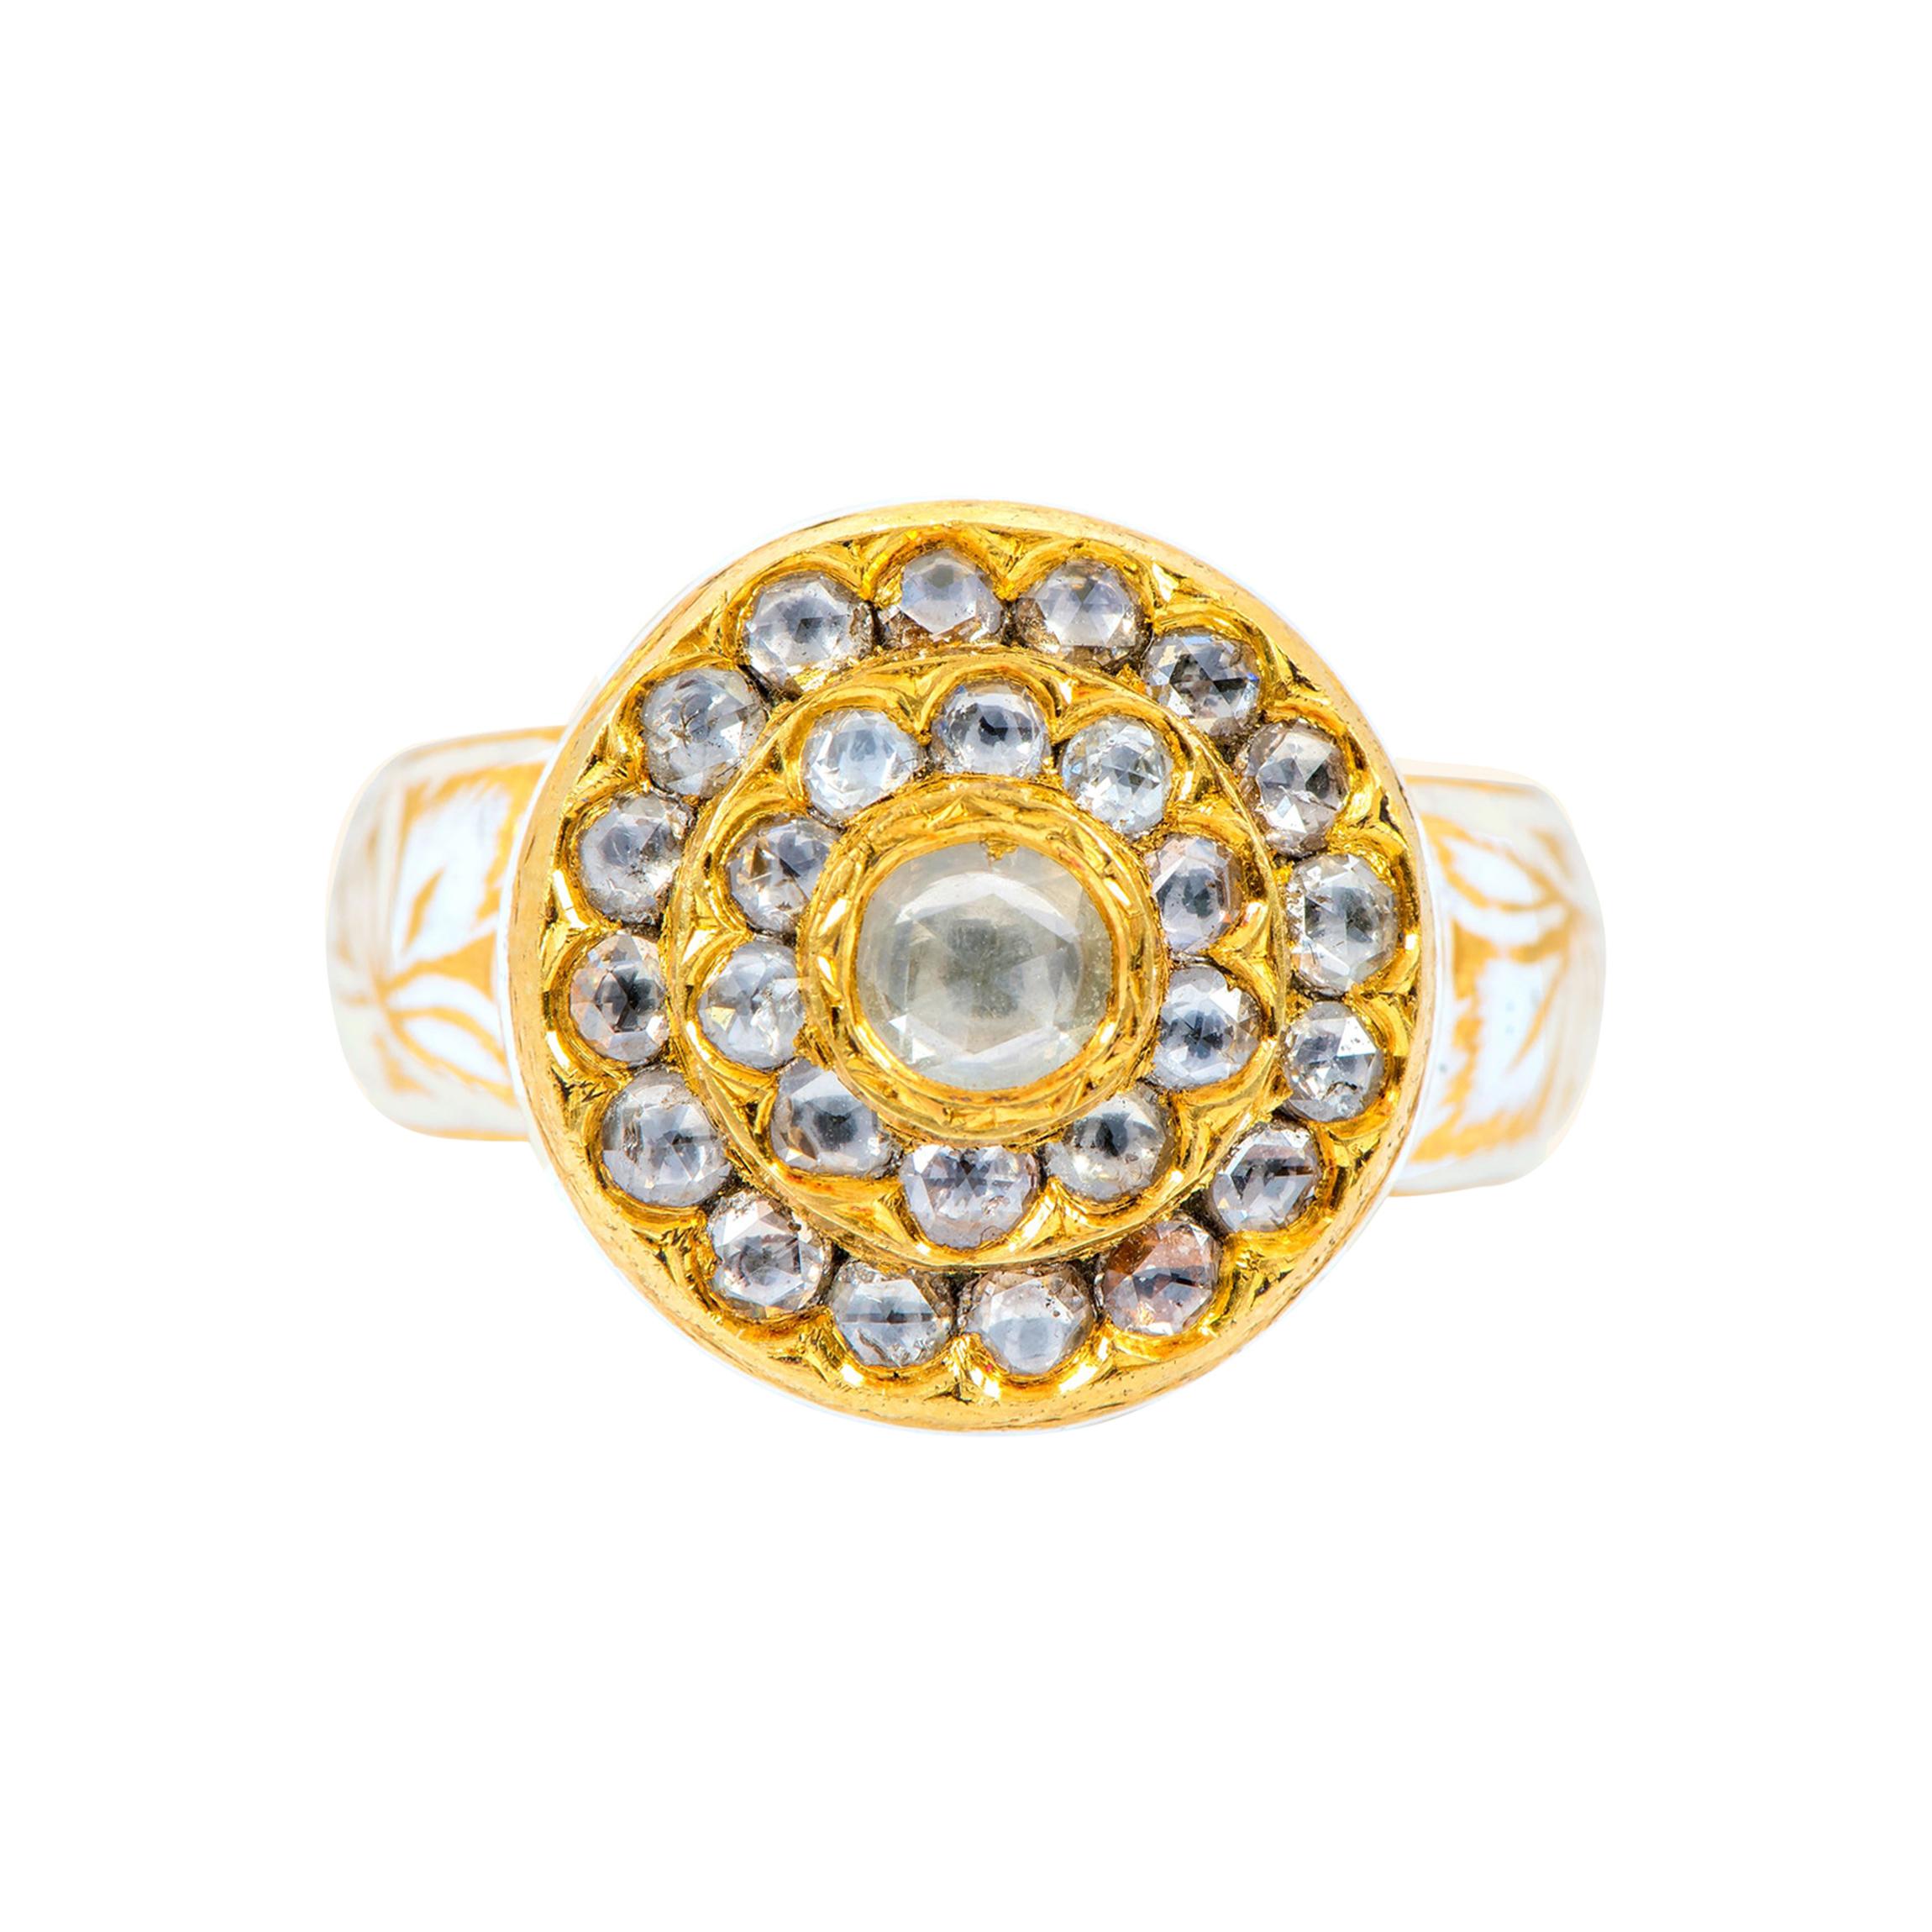 22 Karat Gold Rose-Cut Diamond Ring Handcrafted with White Enamel Work  For Sale